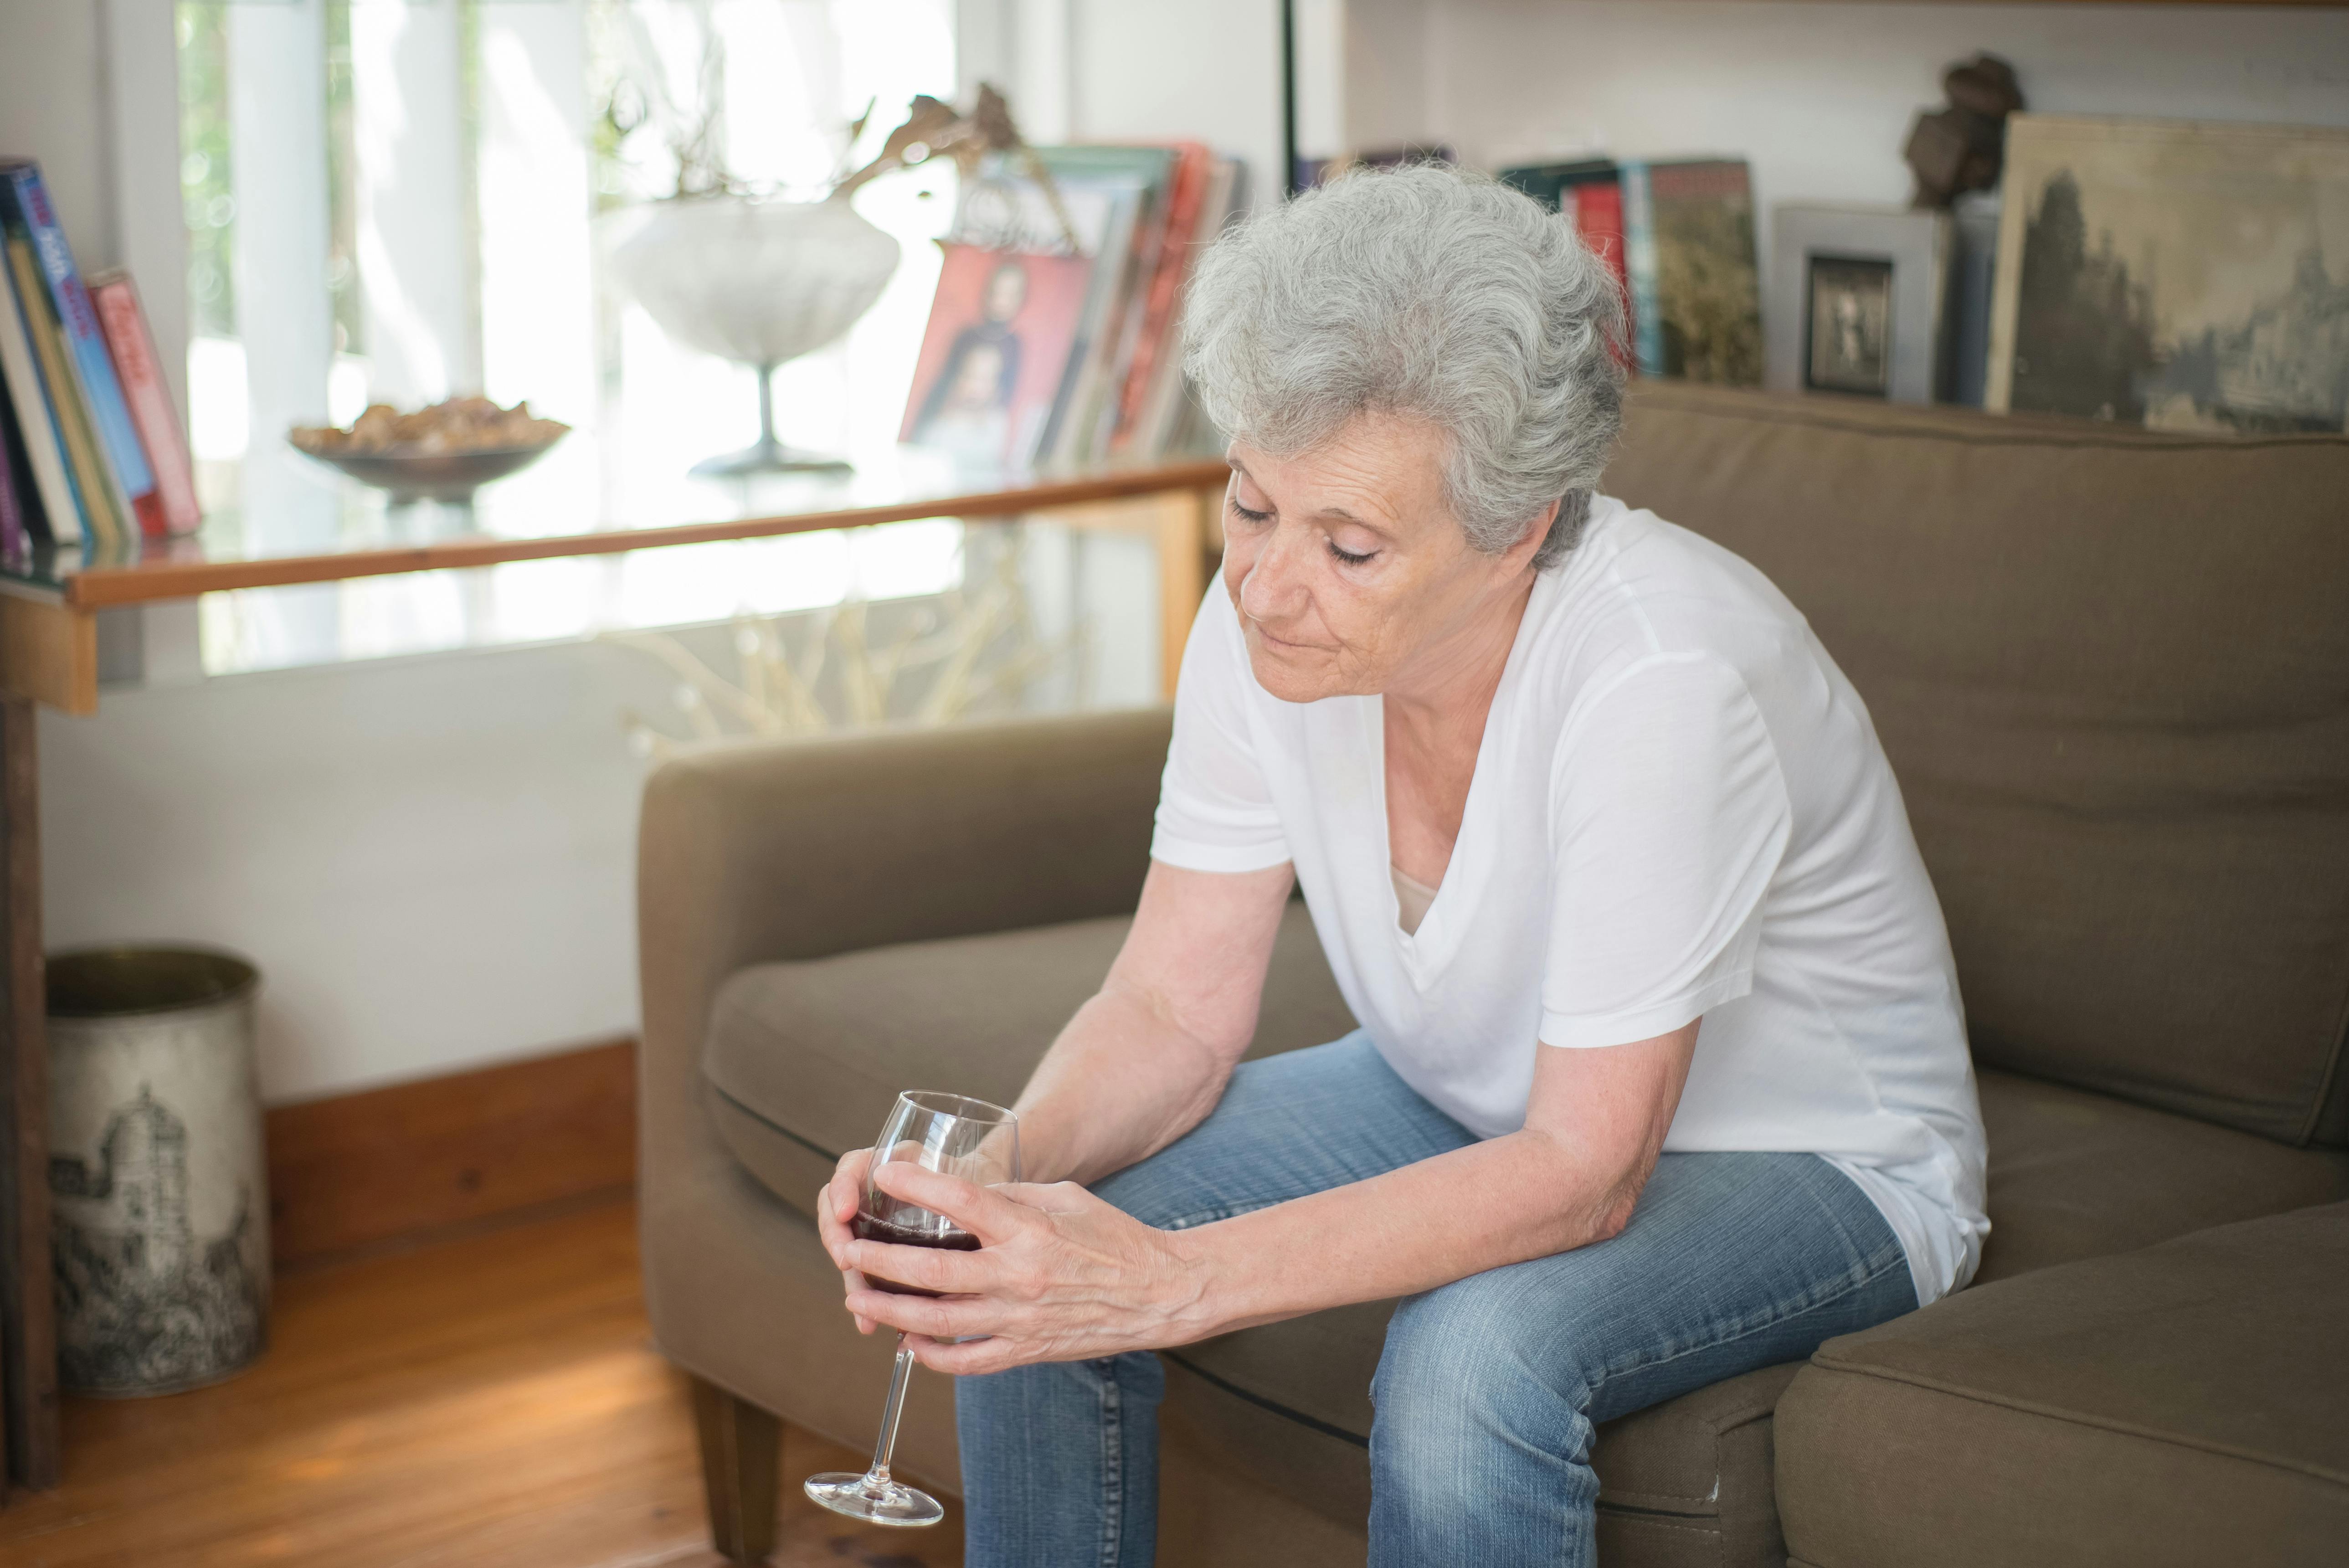 An upset older woman holding a glass of wine while seated on a couch | Source: Pexels